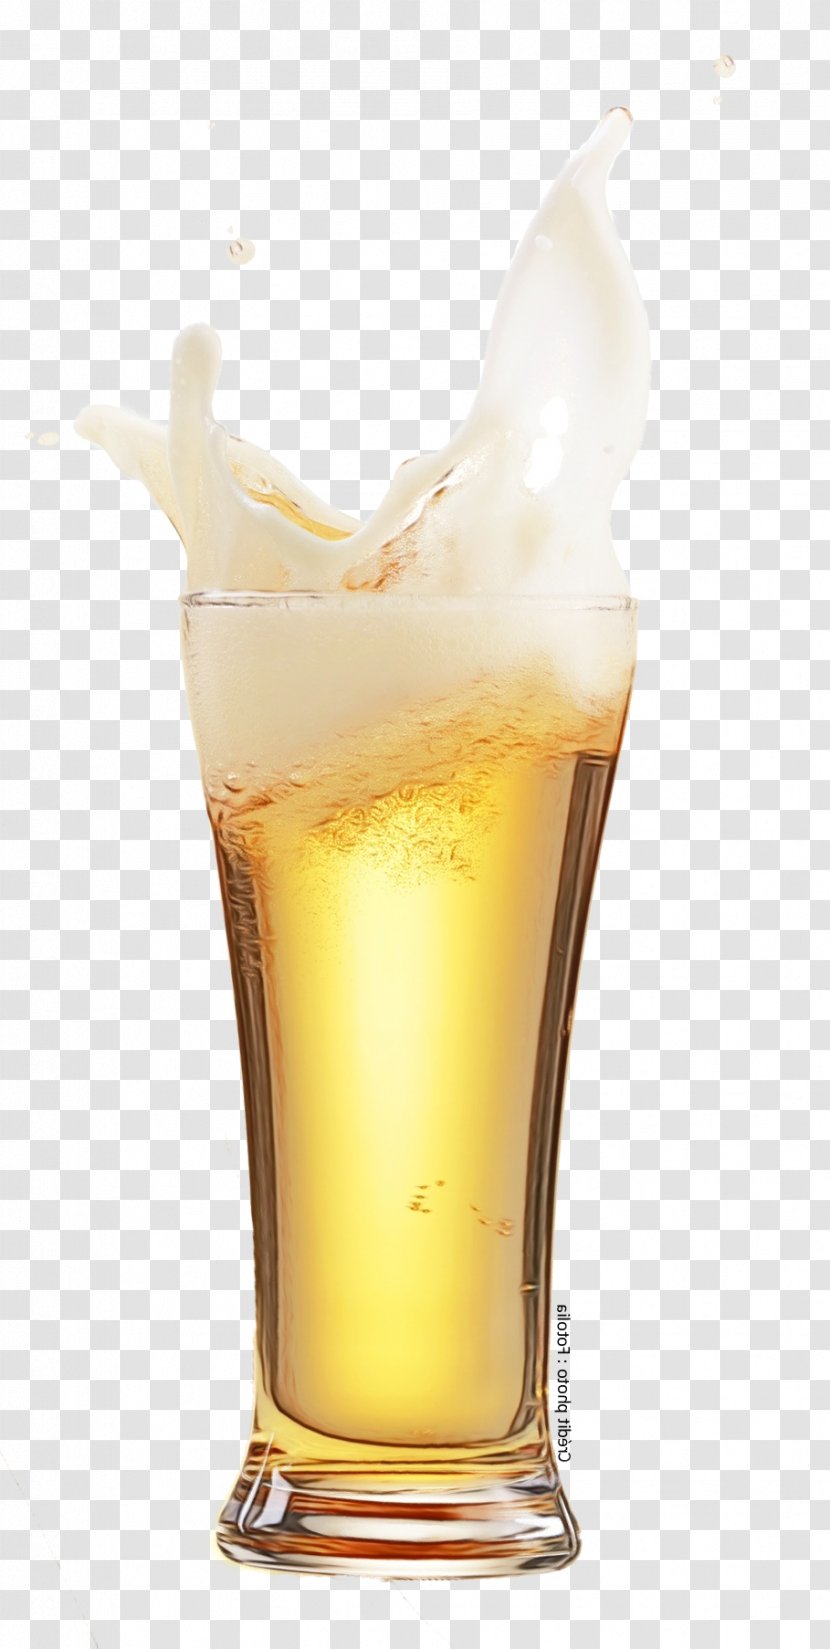 Ice Cream Background - Nonalcoholic Drink - Boilermaker Sodas Transparent PNG